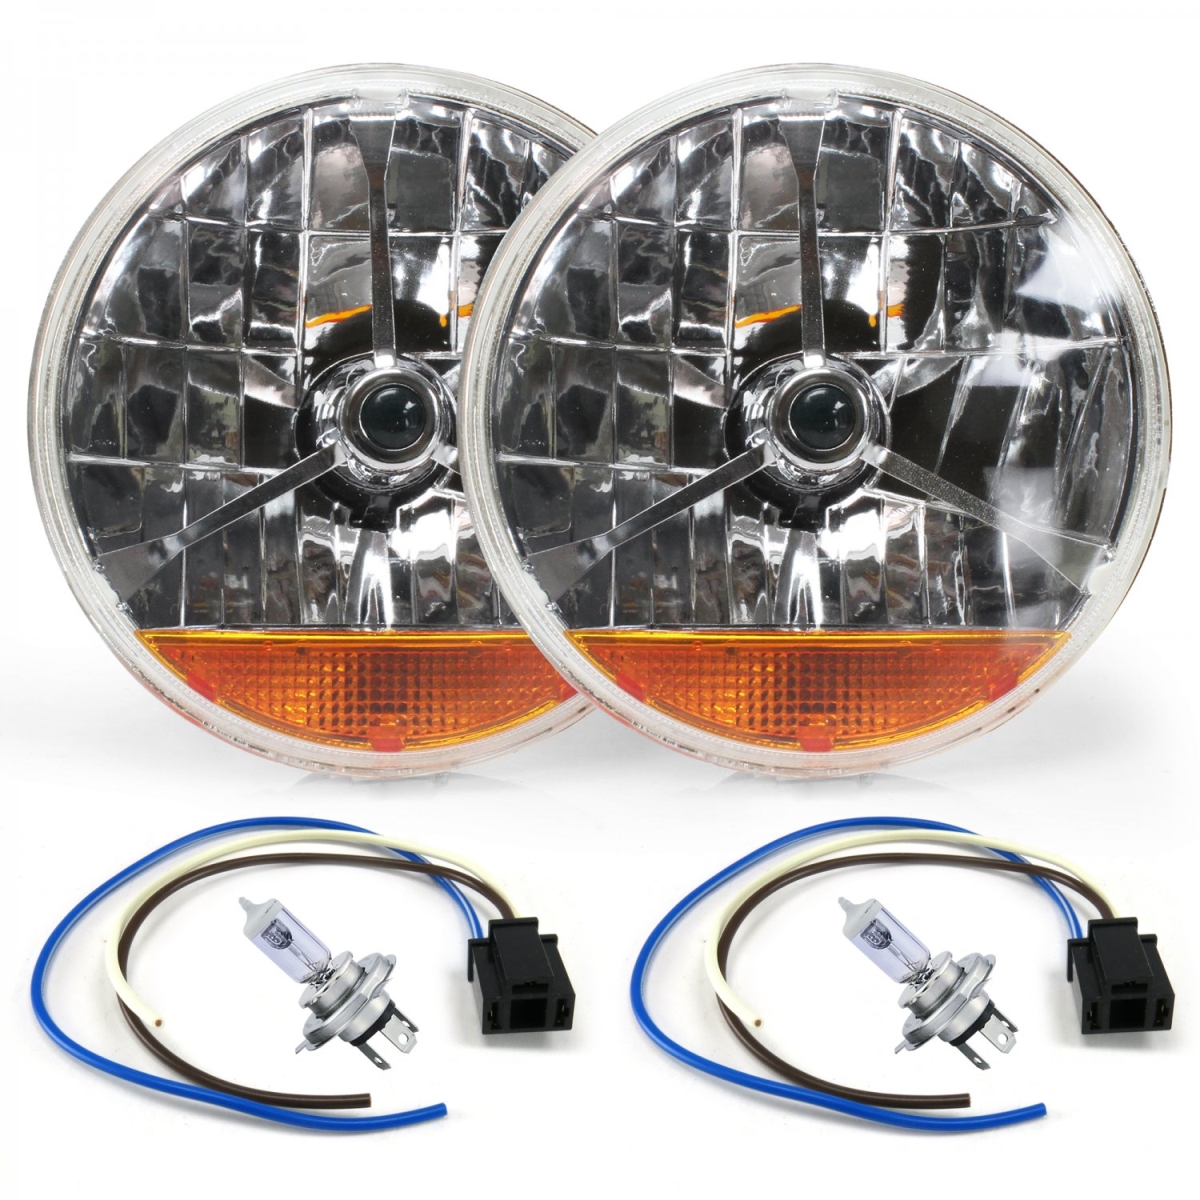 324103 7 In. Tri-bar Halogen Lens Assembly With H4 Bulb, Plug & Amber Turn Signal - Pack Of 2